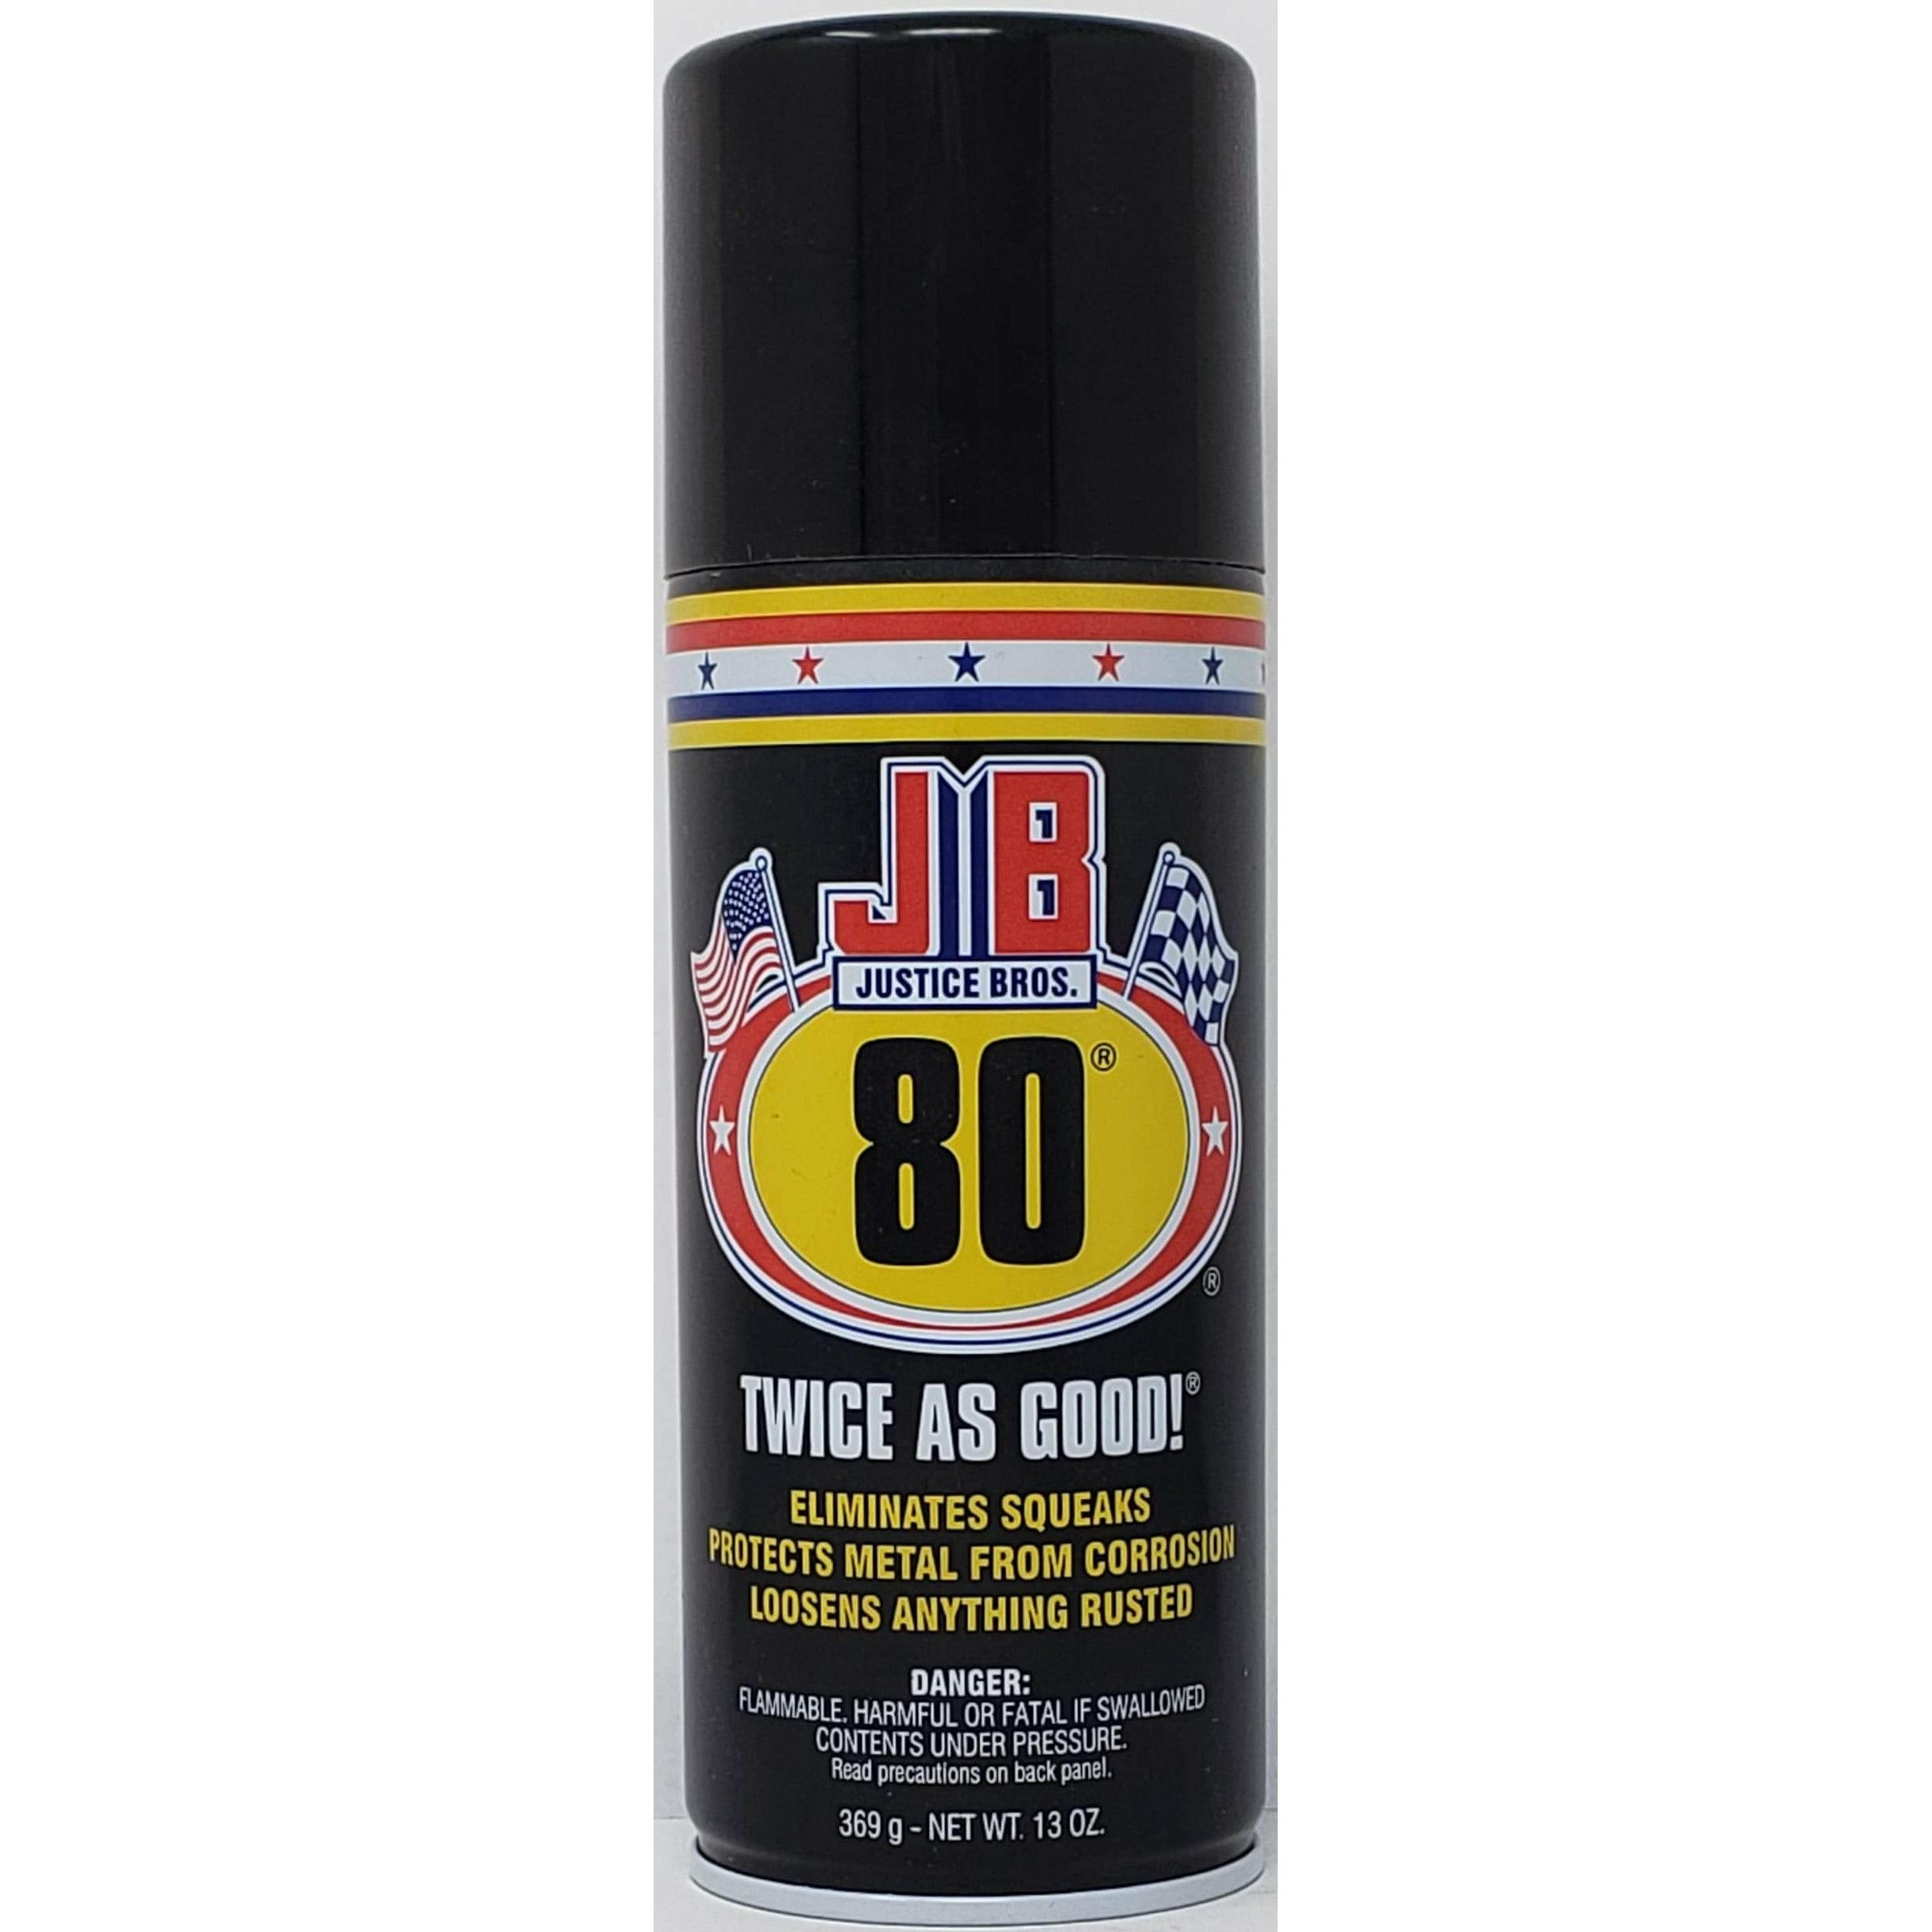 Hot Shot's : Never Rust Lubricant - 9 OZ Spray Can